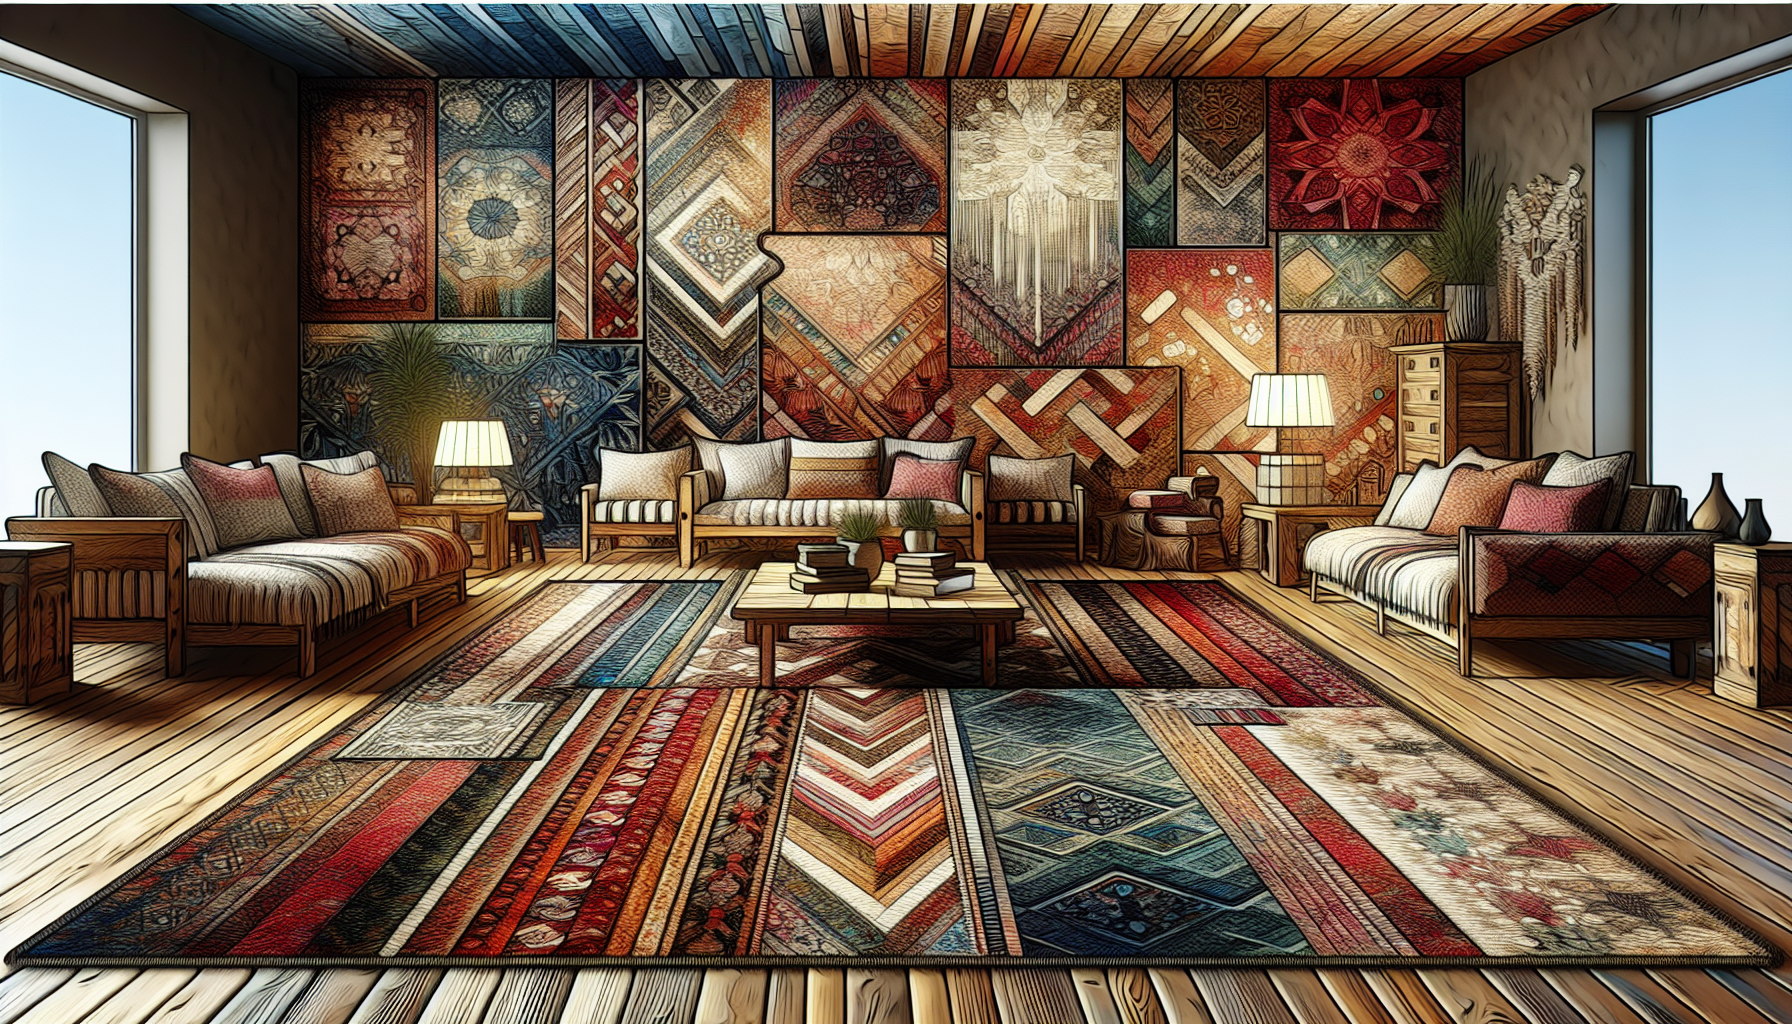 Layered rugs creating depth and interest in a room design